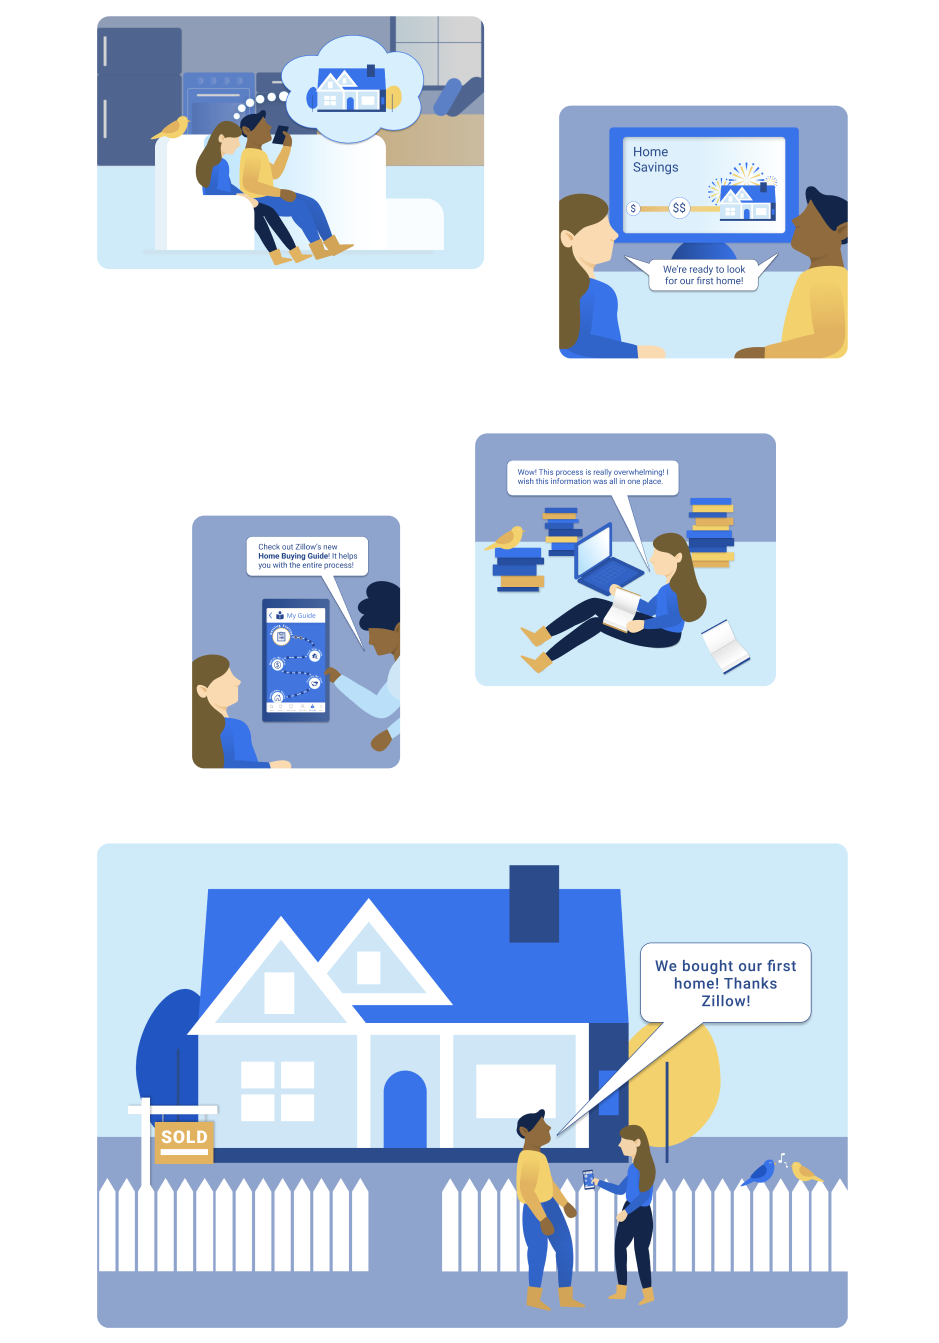 Zillow Storyboard